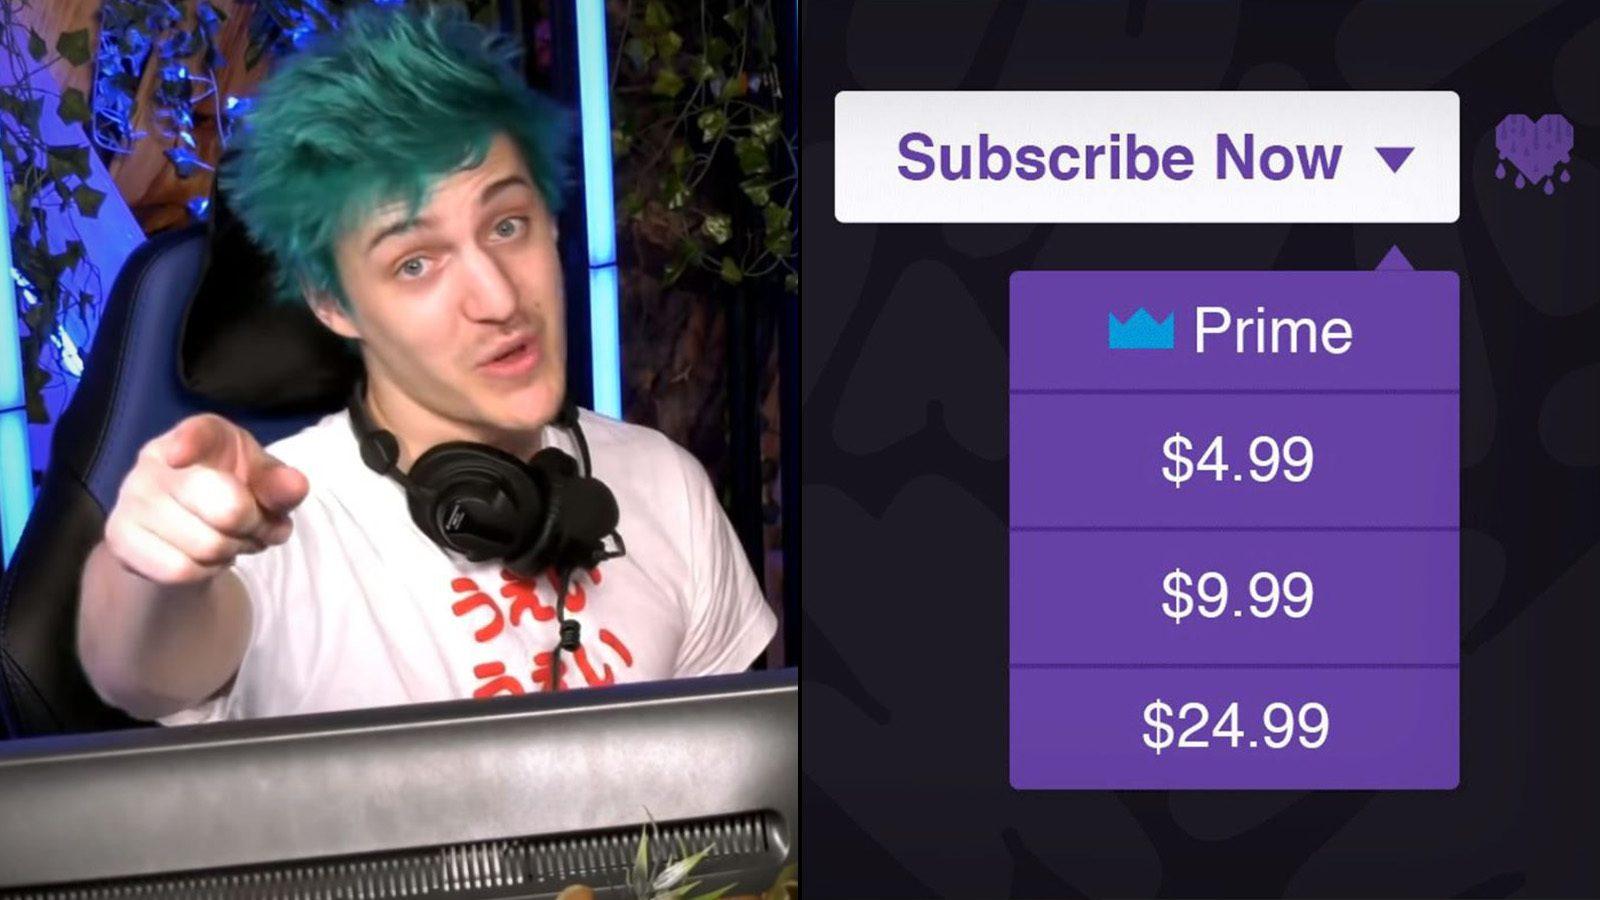 Casimito football stream made him the most subbed streamer on